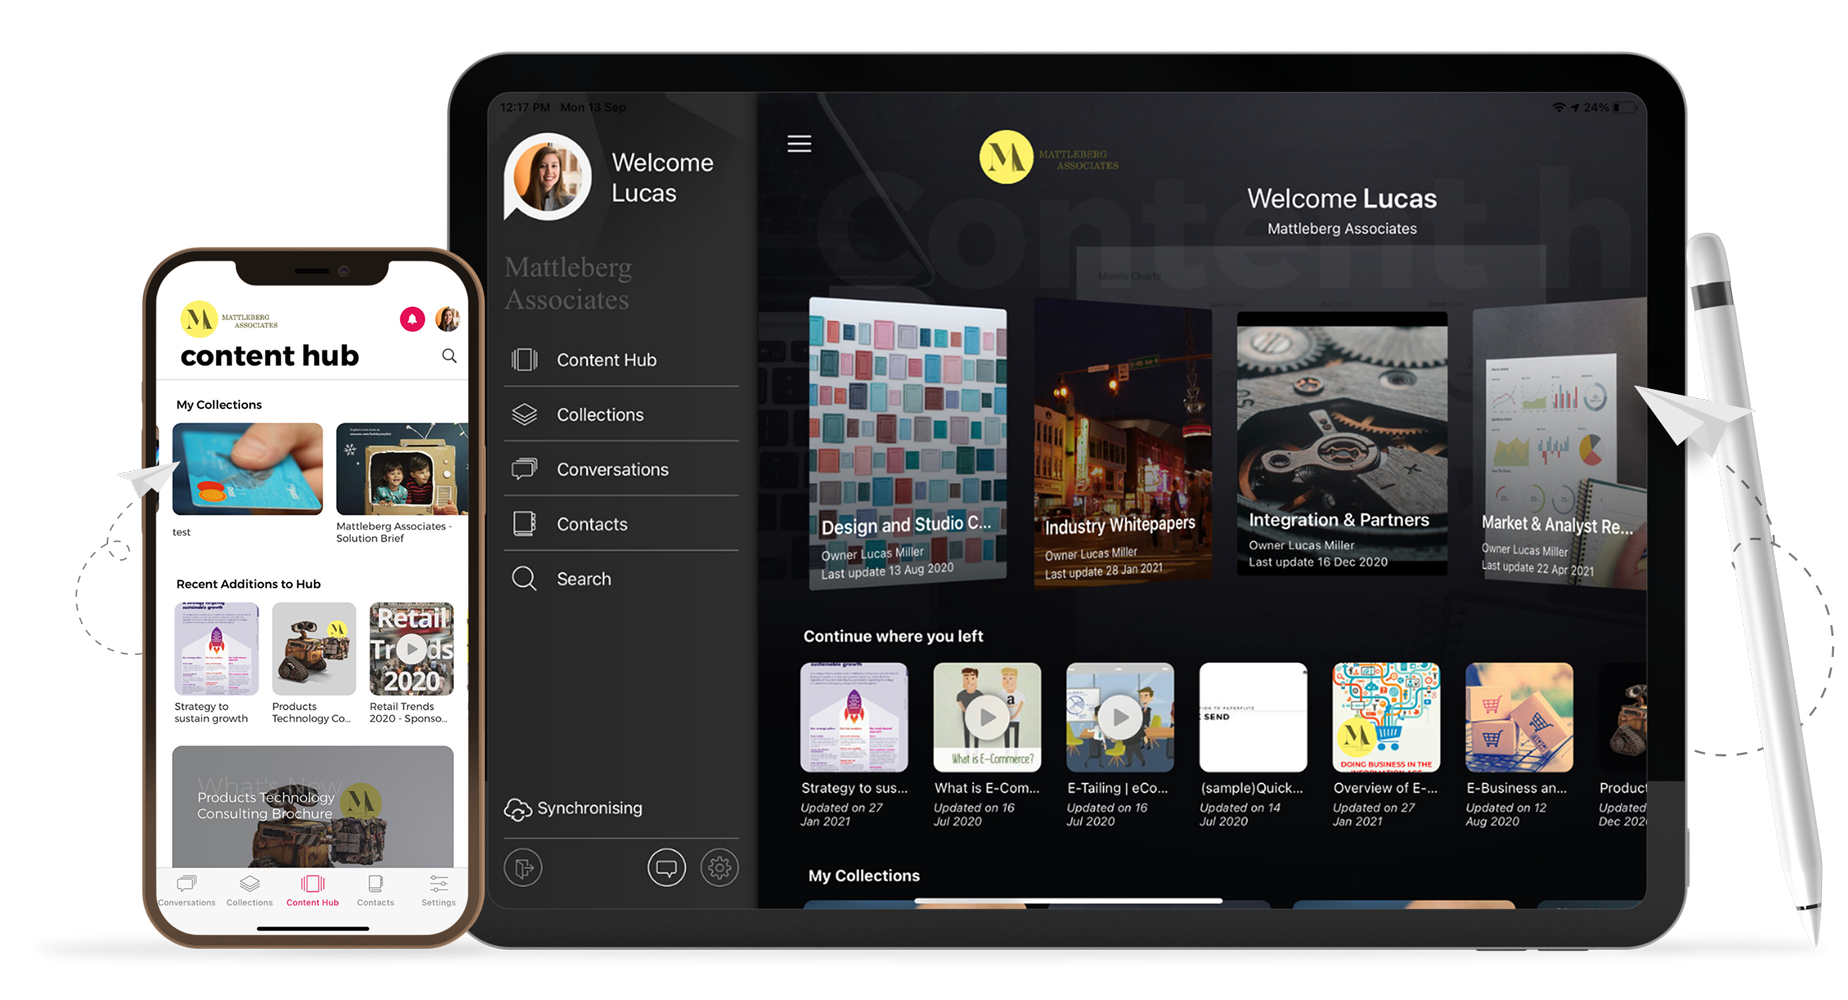 content hub on paperflite's iPhone and iPad app